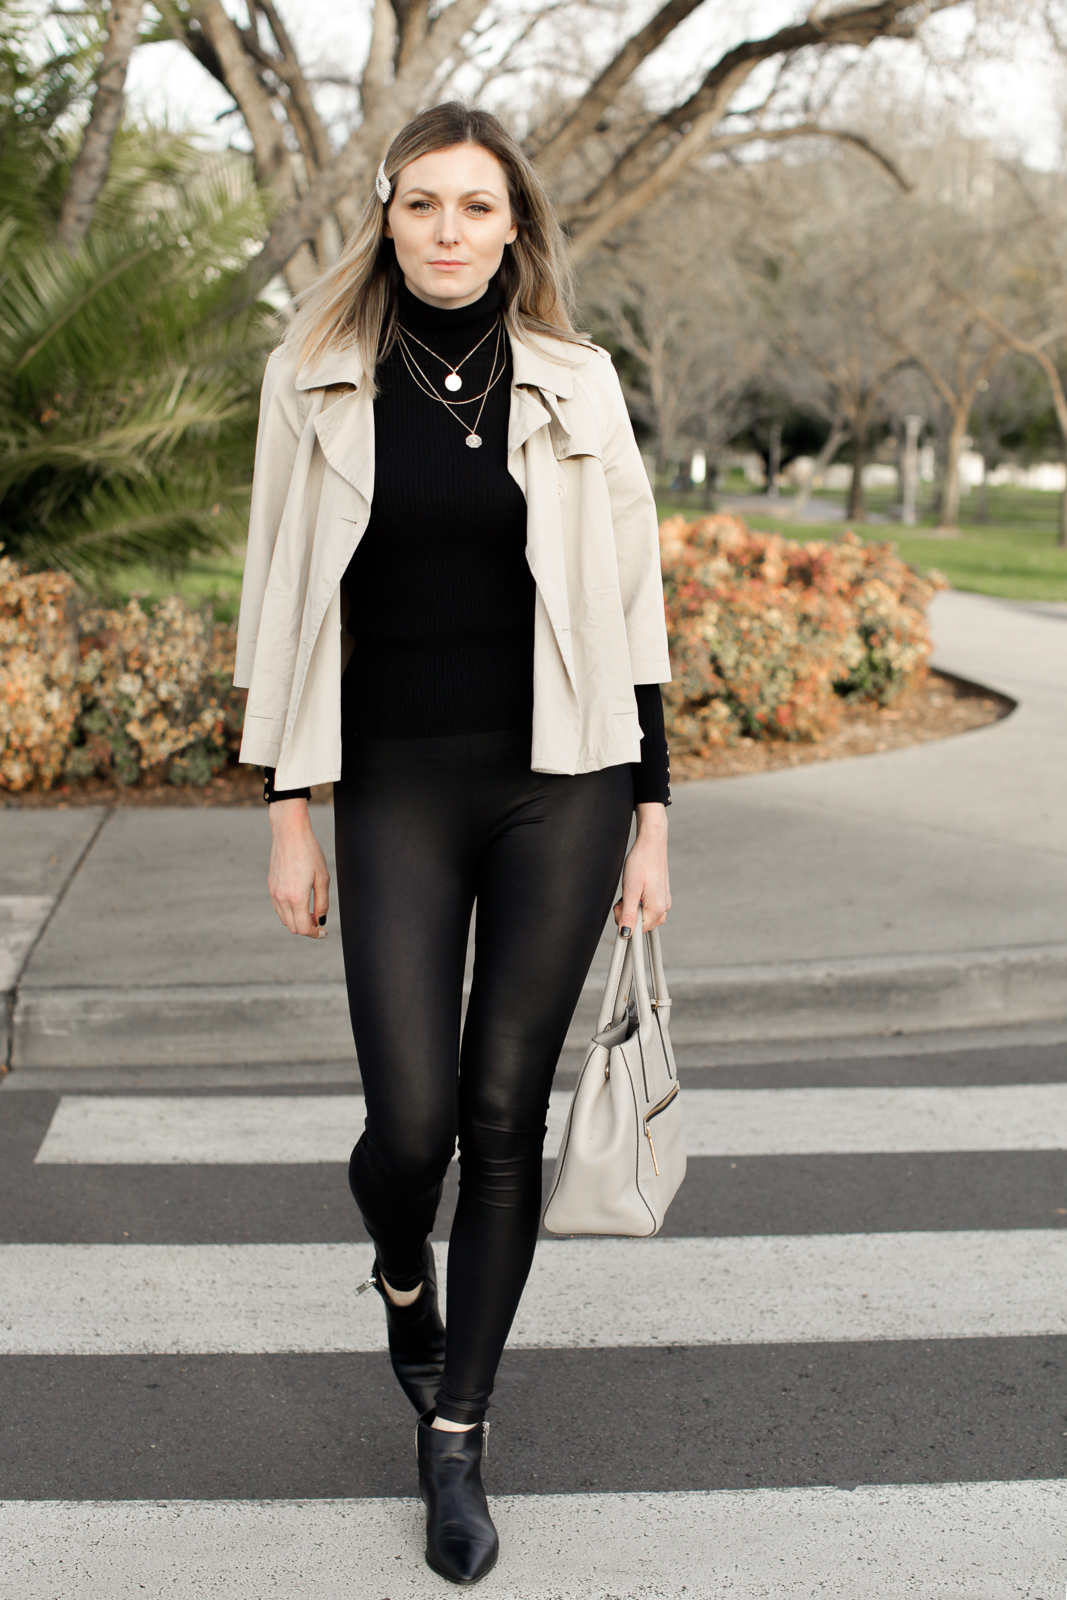 How To Wear Faux Leather Leggings During The Day - Tea Cups & Tulips